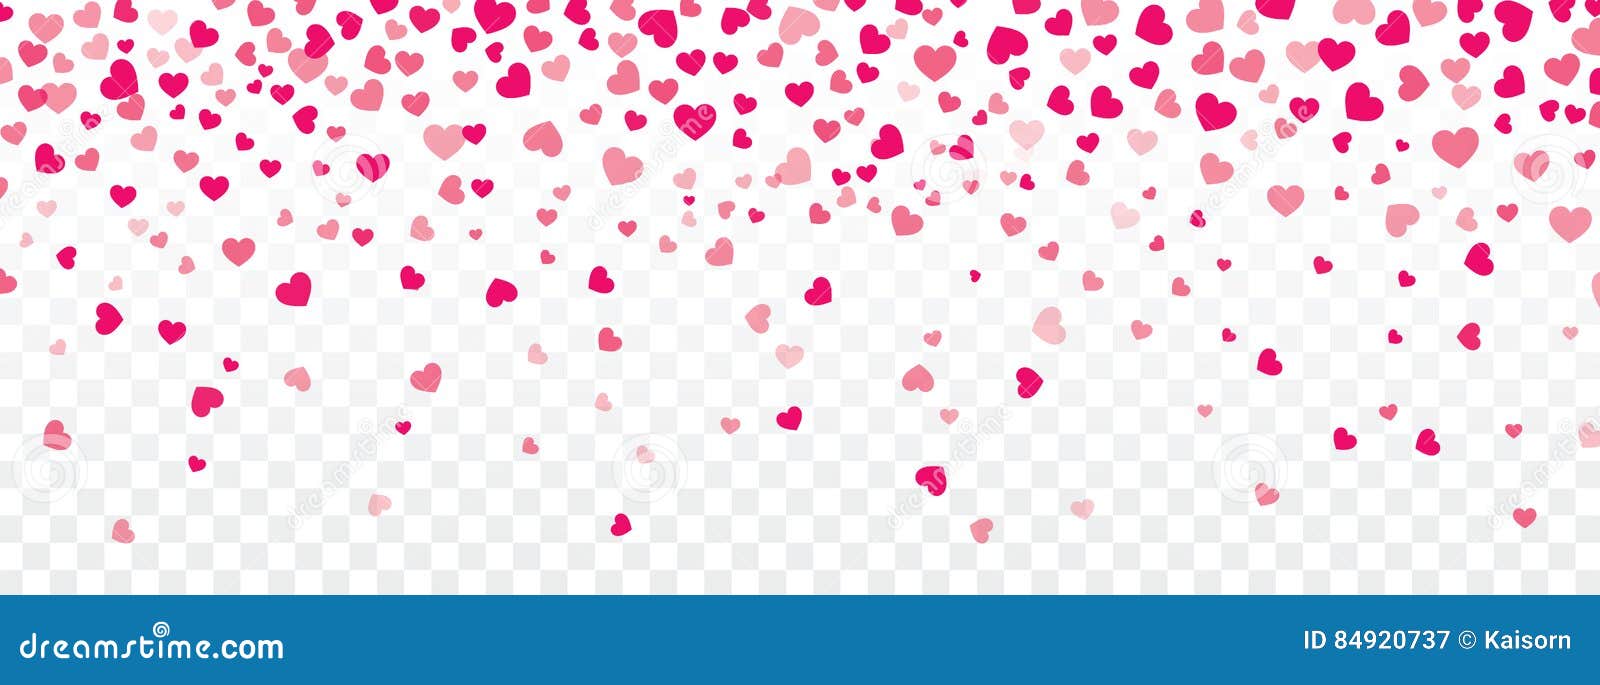 valentine background with hearts falling on transparent